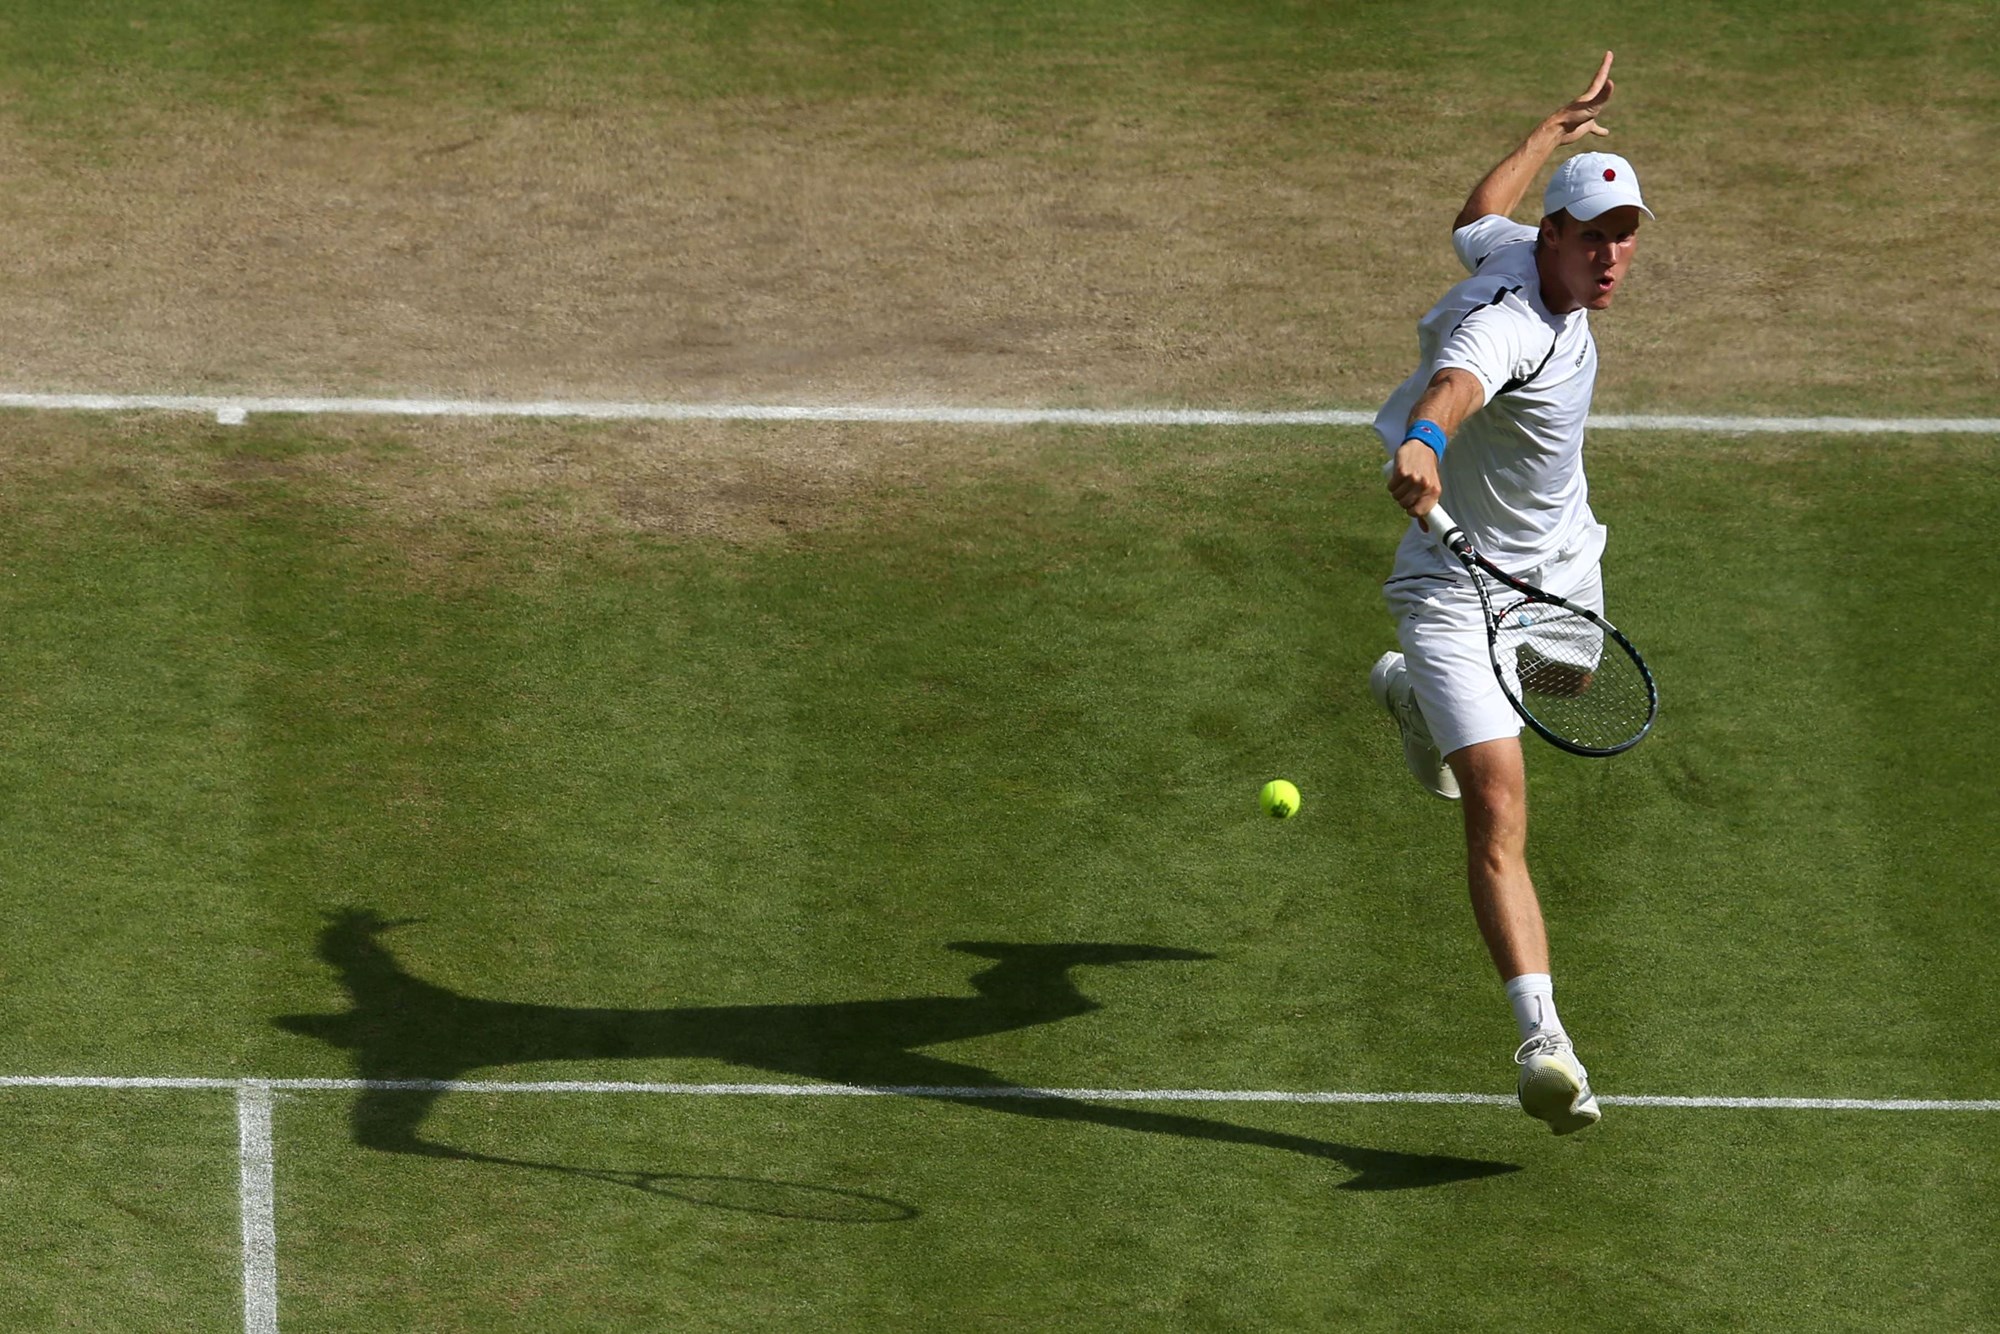 Dom Inglot hitting a volley at Wimbledon in 2012